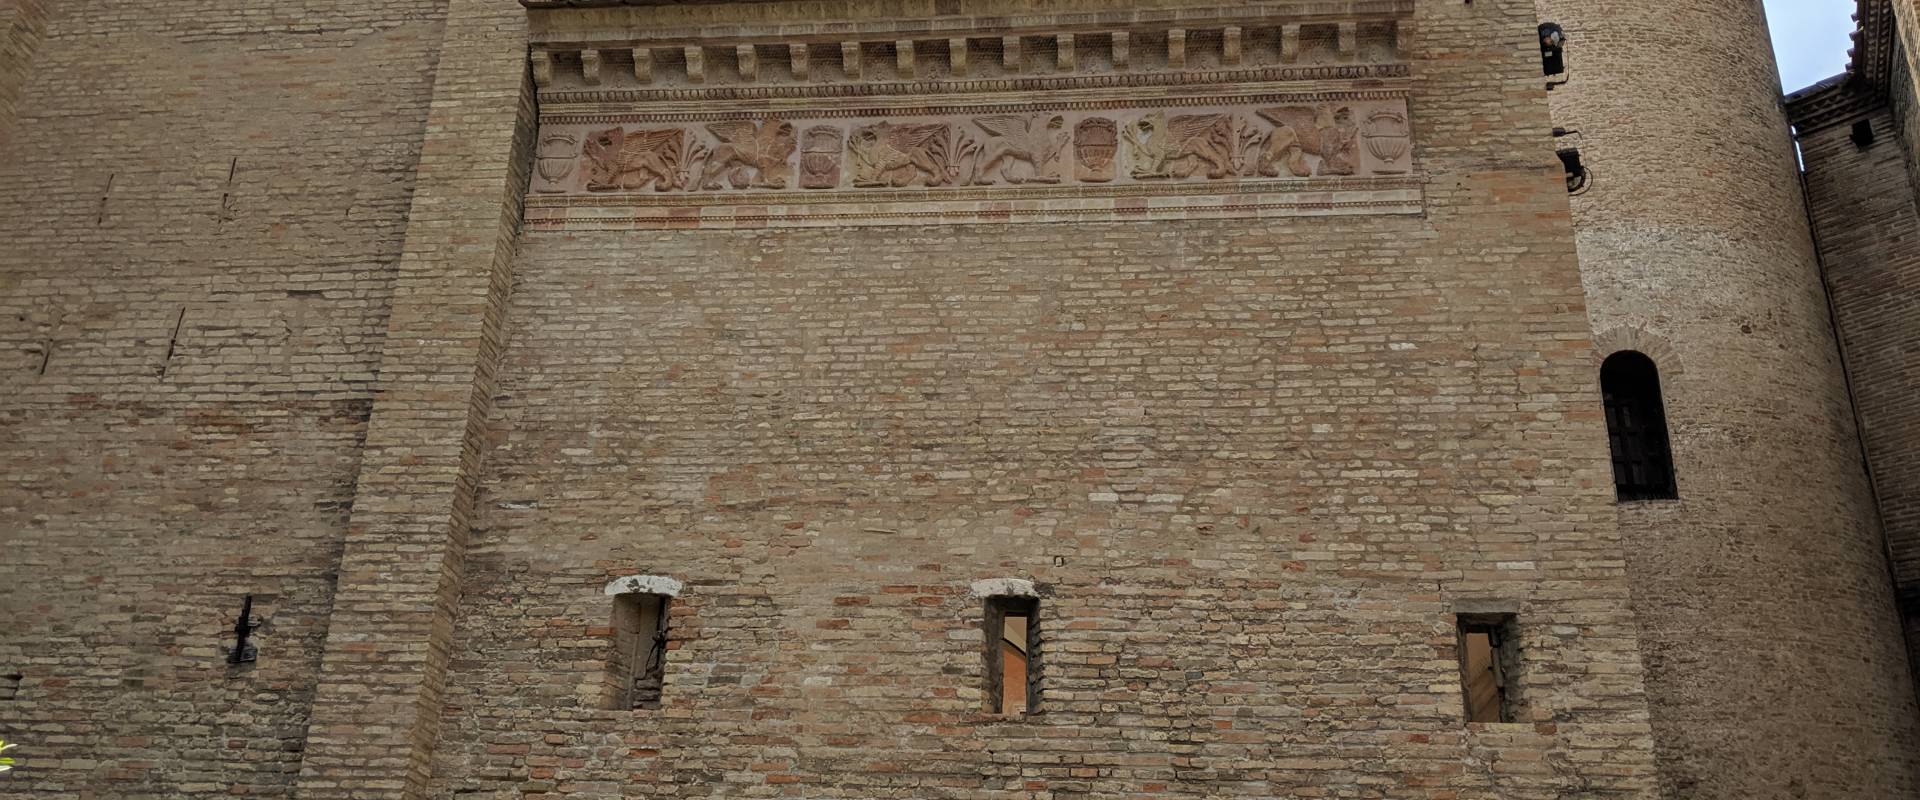 San Vitale Exterior Wall with Griffin Frieze photo by Conor Manley